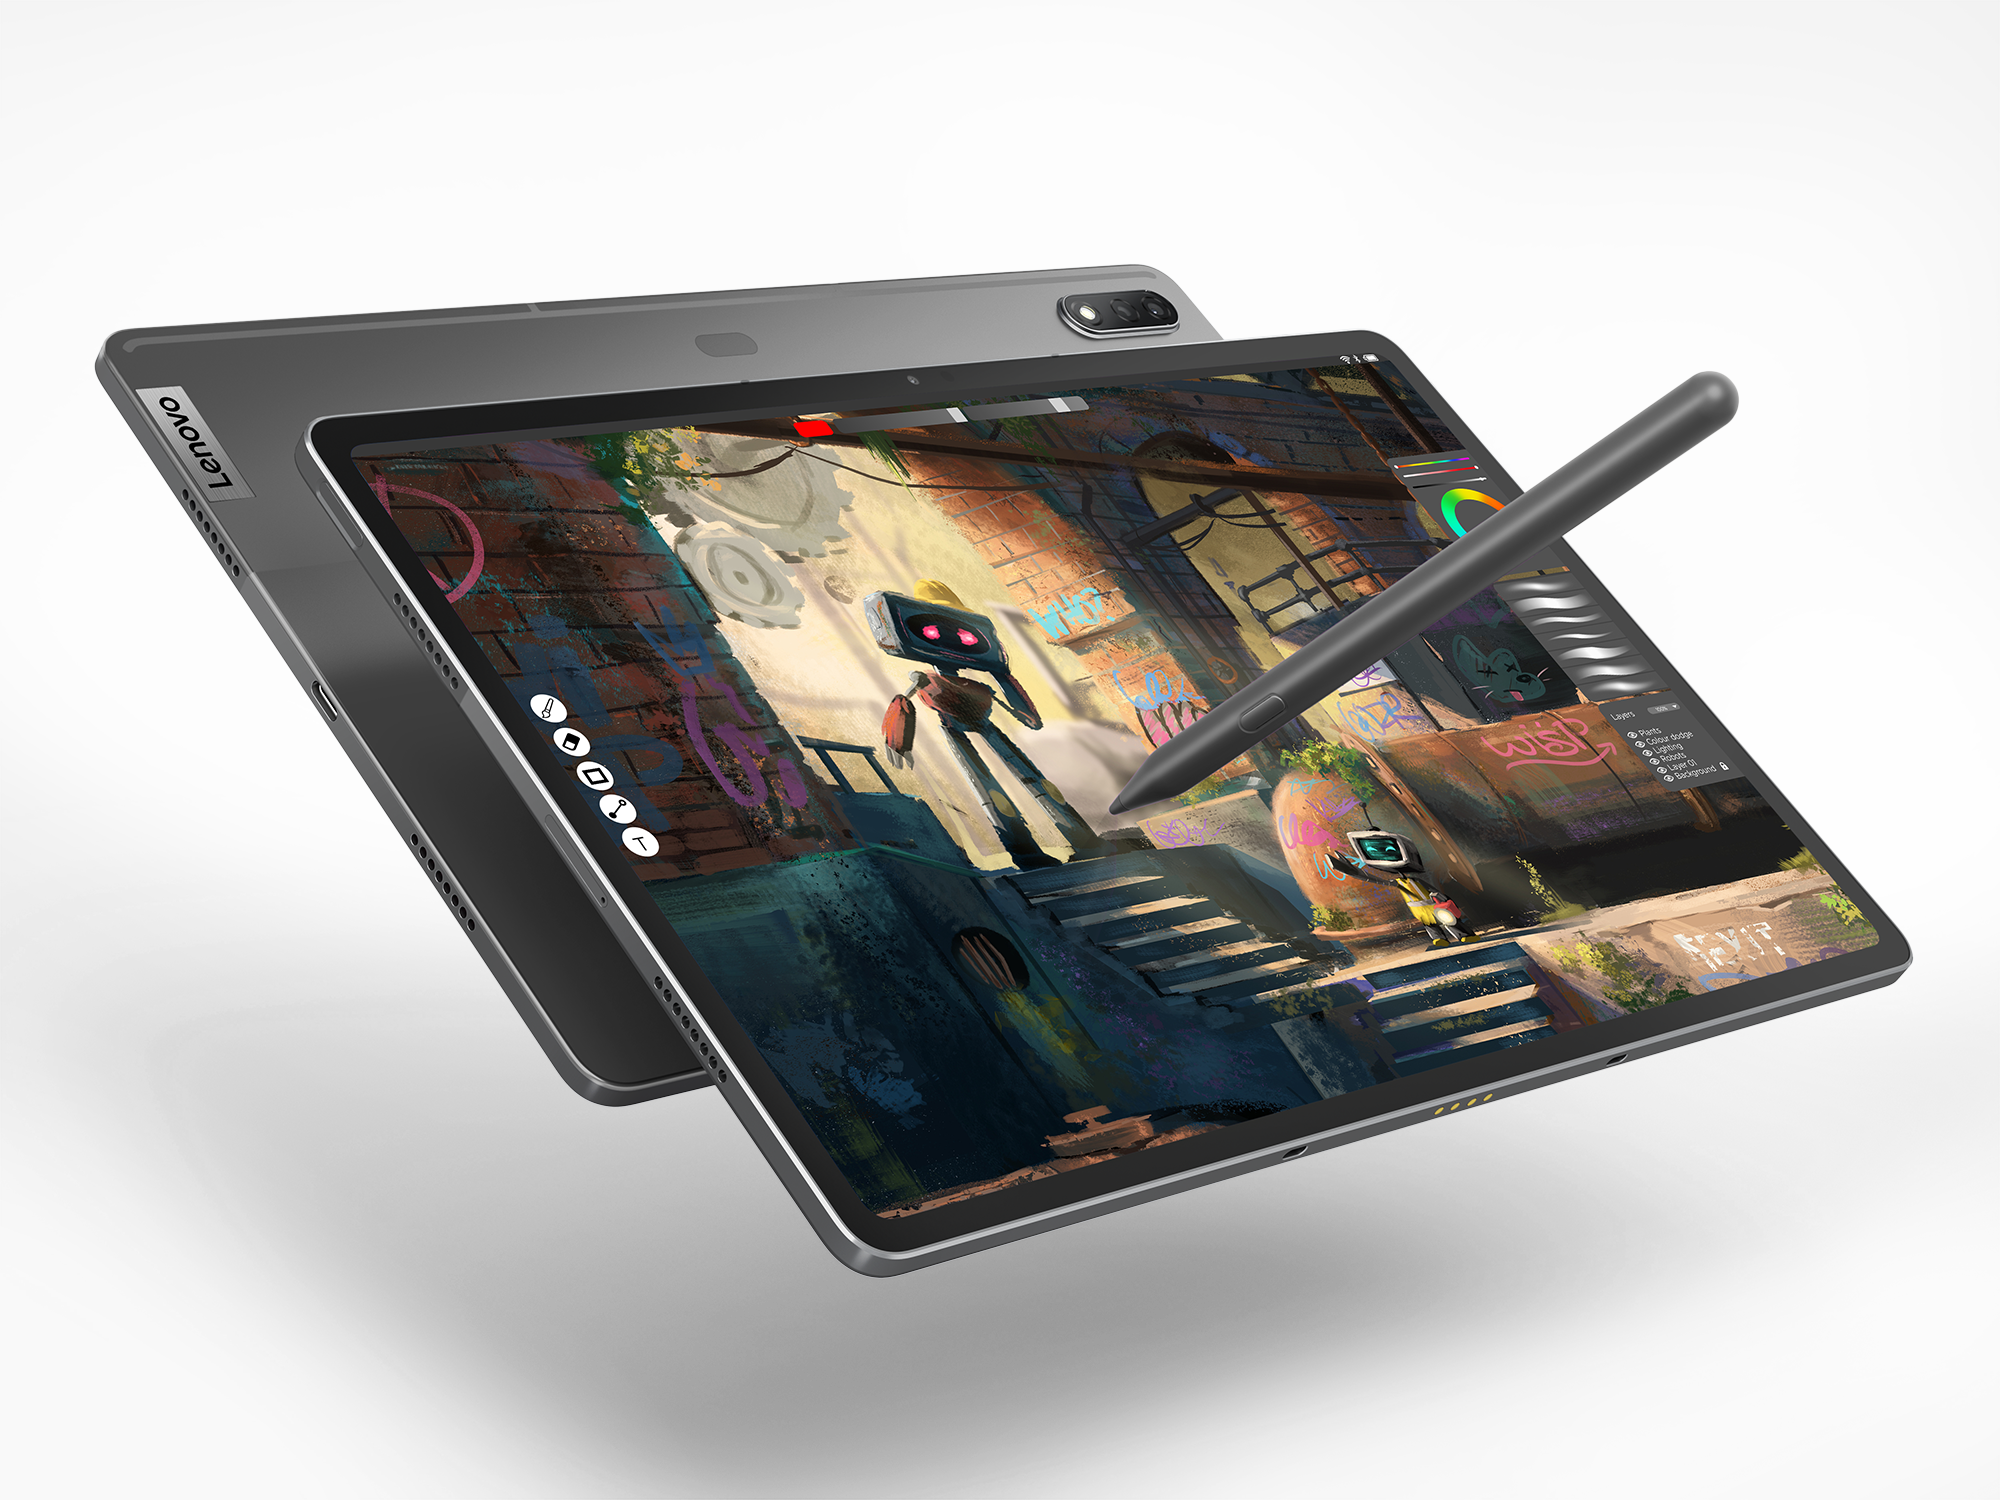 The Tab P12 Pro is the newest high-end Android tablet in - NotebookCheck.net News